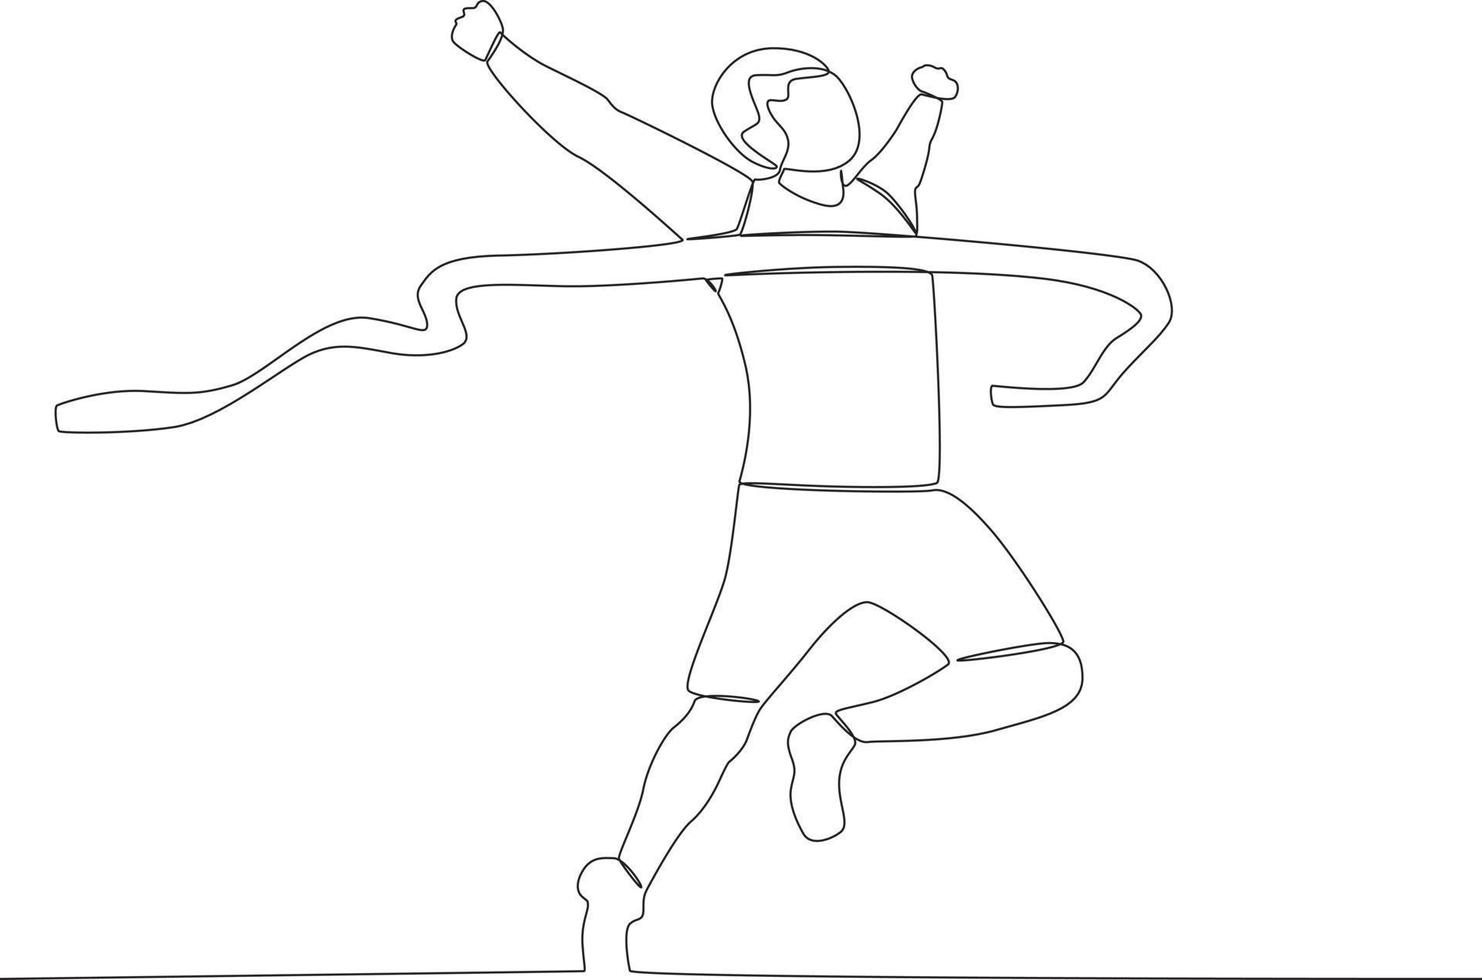 A man successfully won the running championship vector